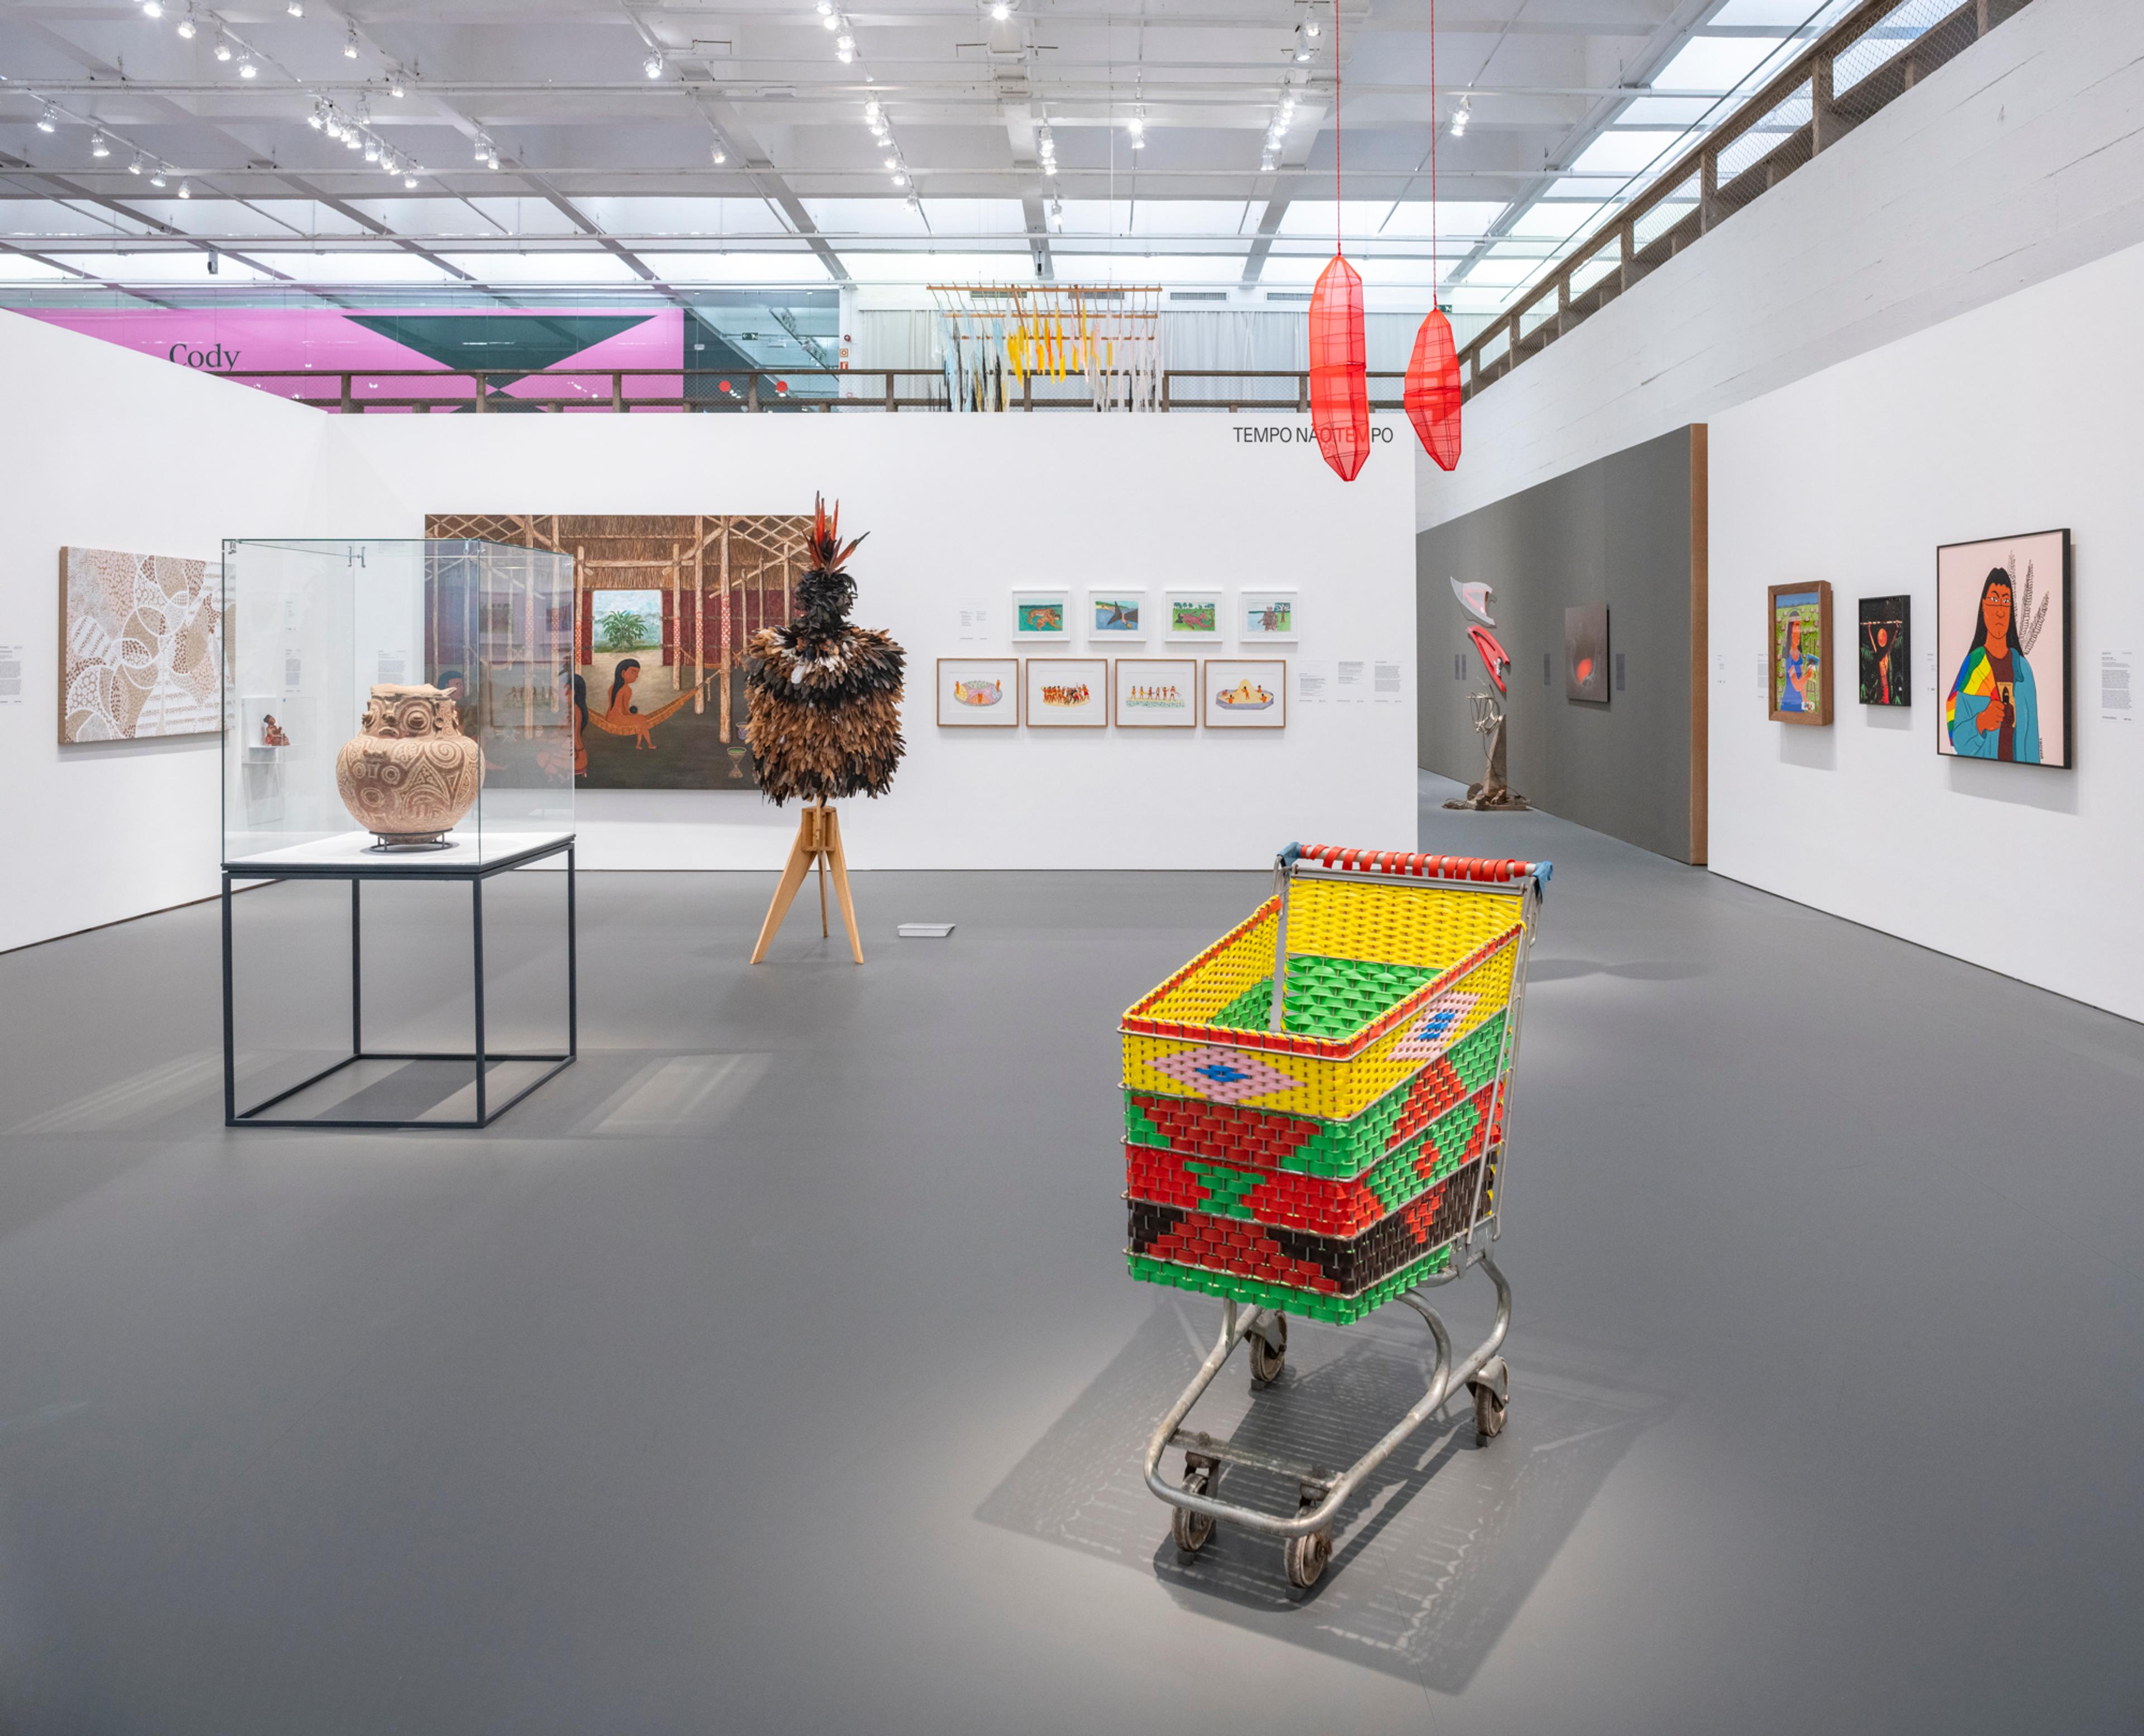 An exhibition room with white walls, presenting a range of colorful objects, images and paintings